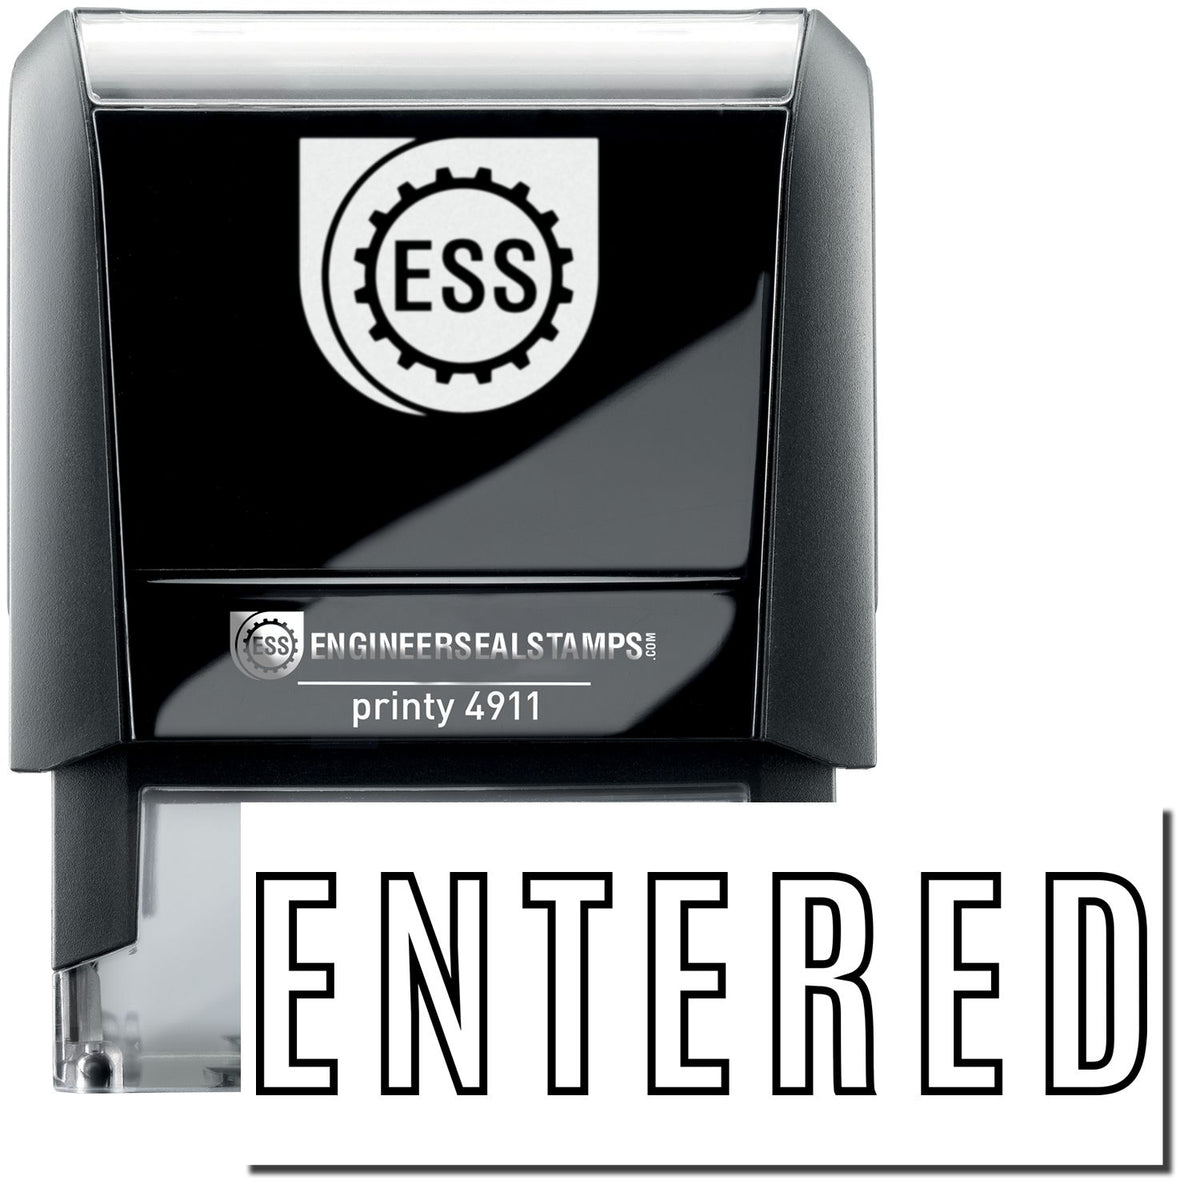 A self-inking stamp with a stamped image showing how the text &quot;ENTERED&quot; in an outline style is displayed after stamping.